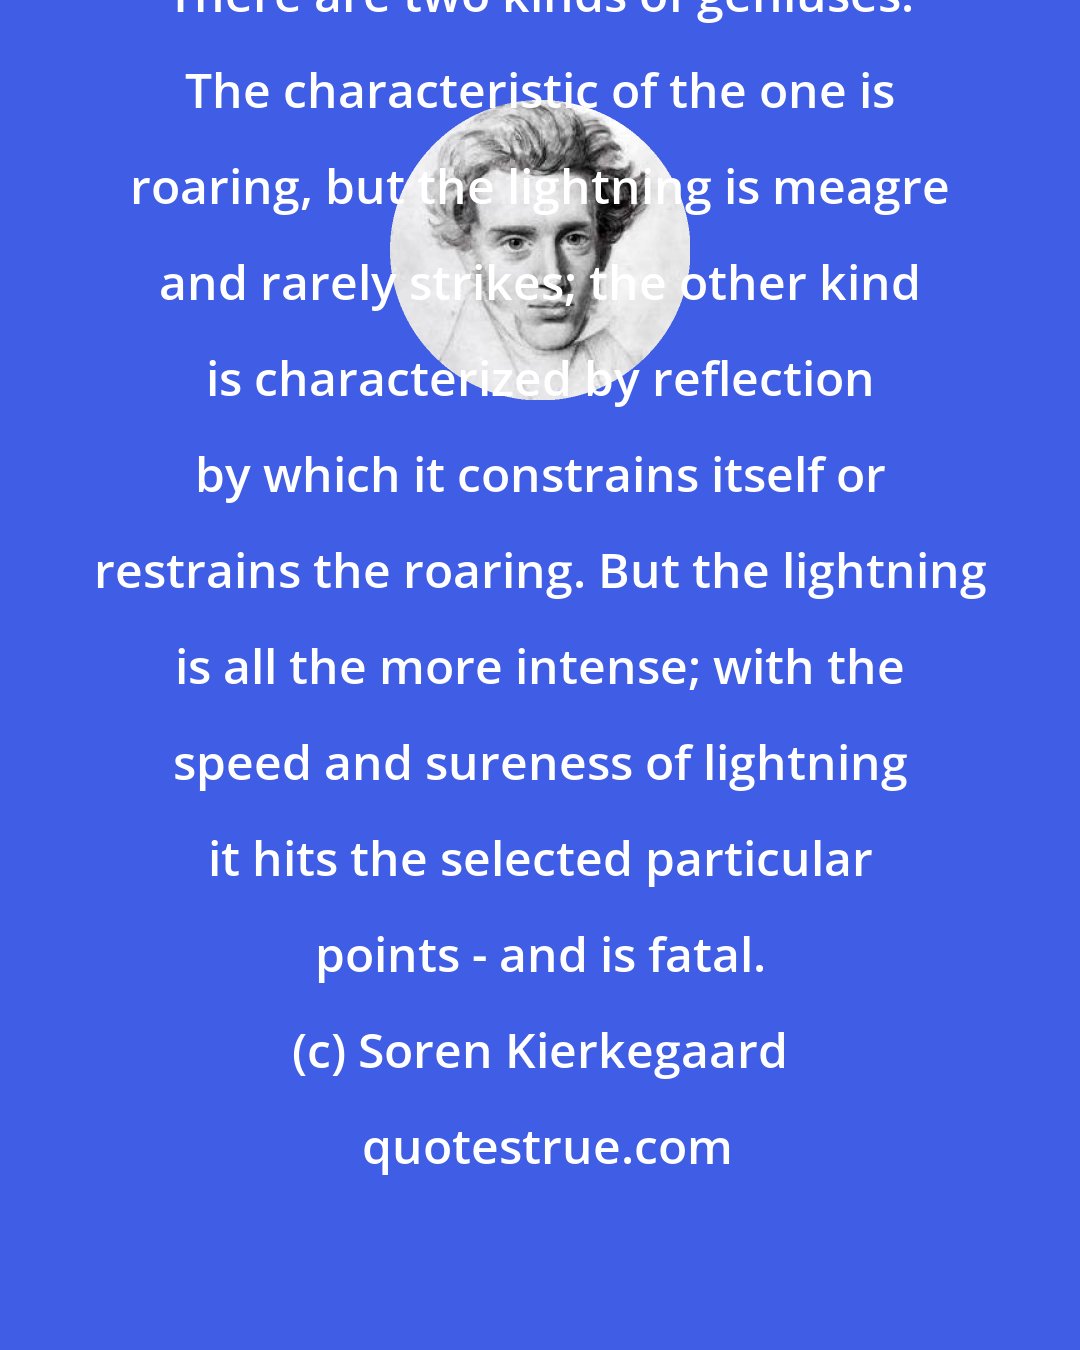 Soren Kierkegaard: There are two kinds of geniuses. The characteristic of the one is roaring, but the lightning is meagre and rarely strikes; the other kind is characterized by reflection by which it constrains itself or restrains the roaring. But the lightning is all the more intense; with the speed and sureness of lightning it hits the selected particular points - and is fatal.